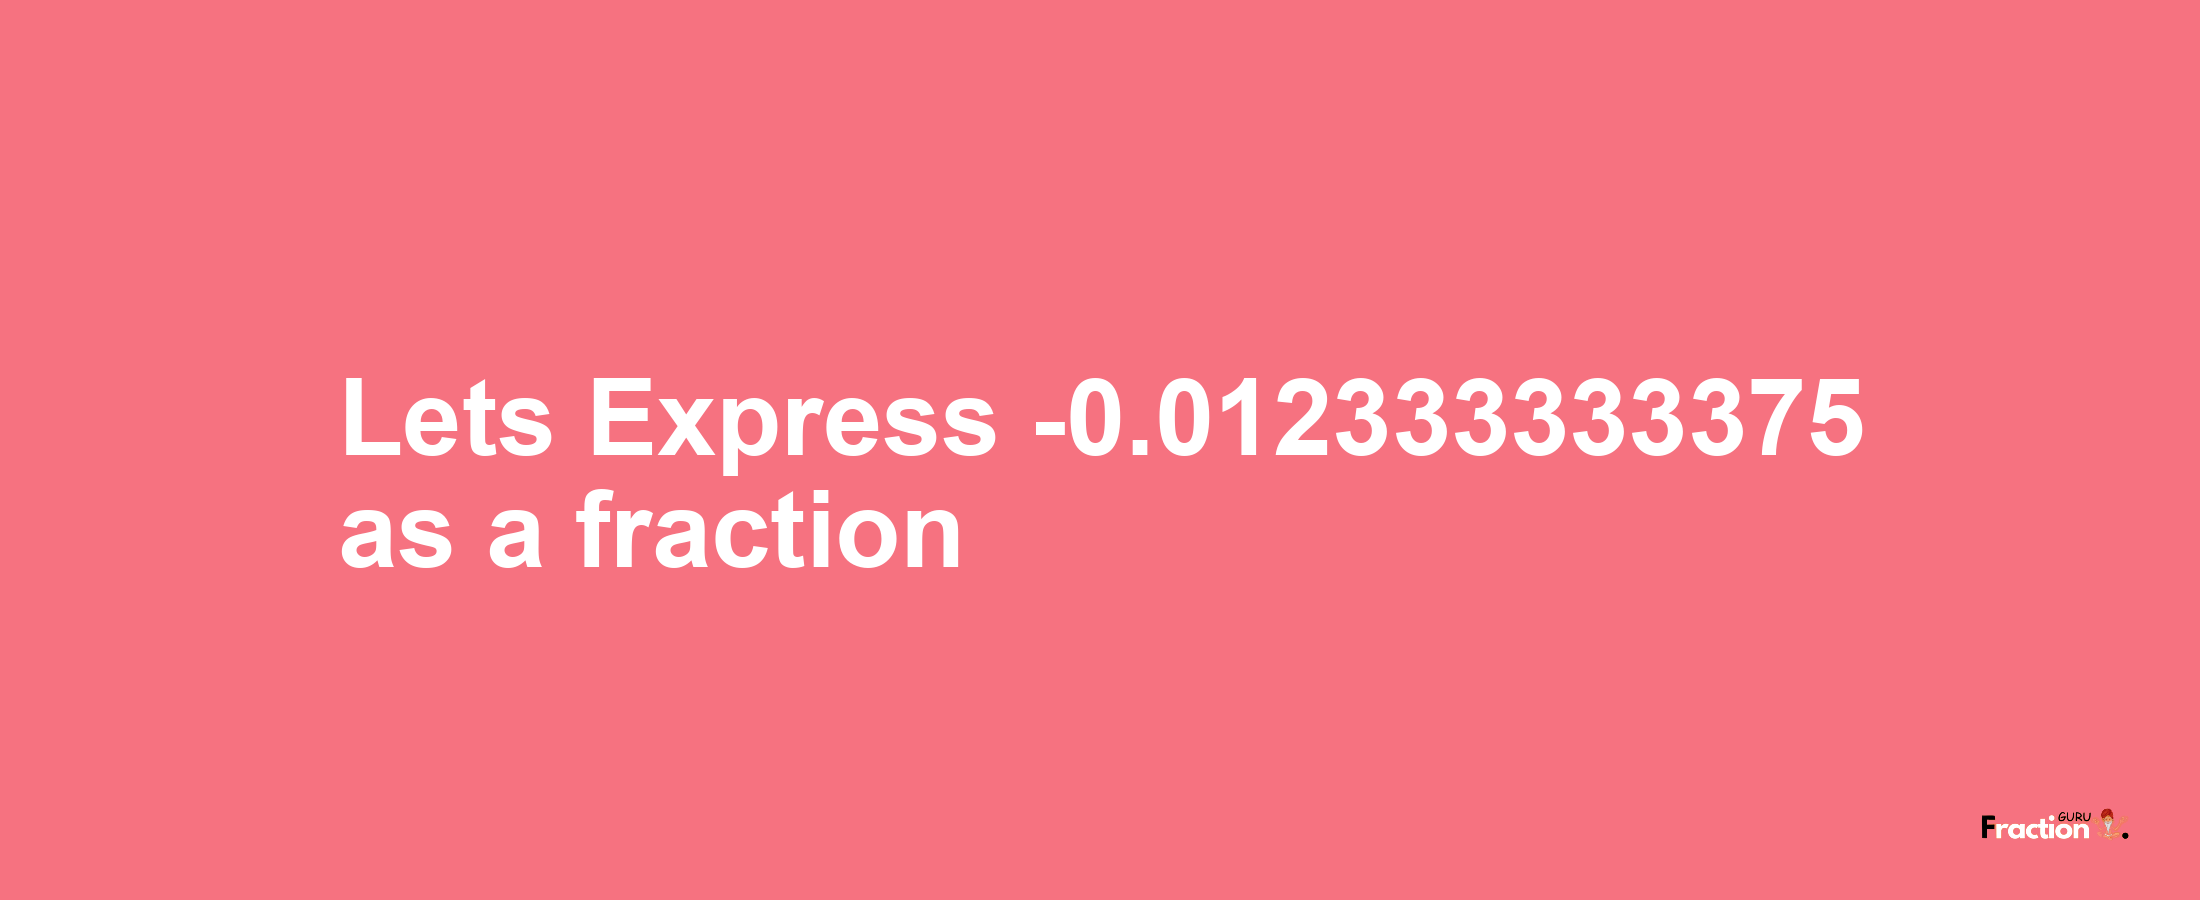 Lets Express -0.012333333375 as afraction